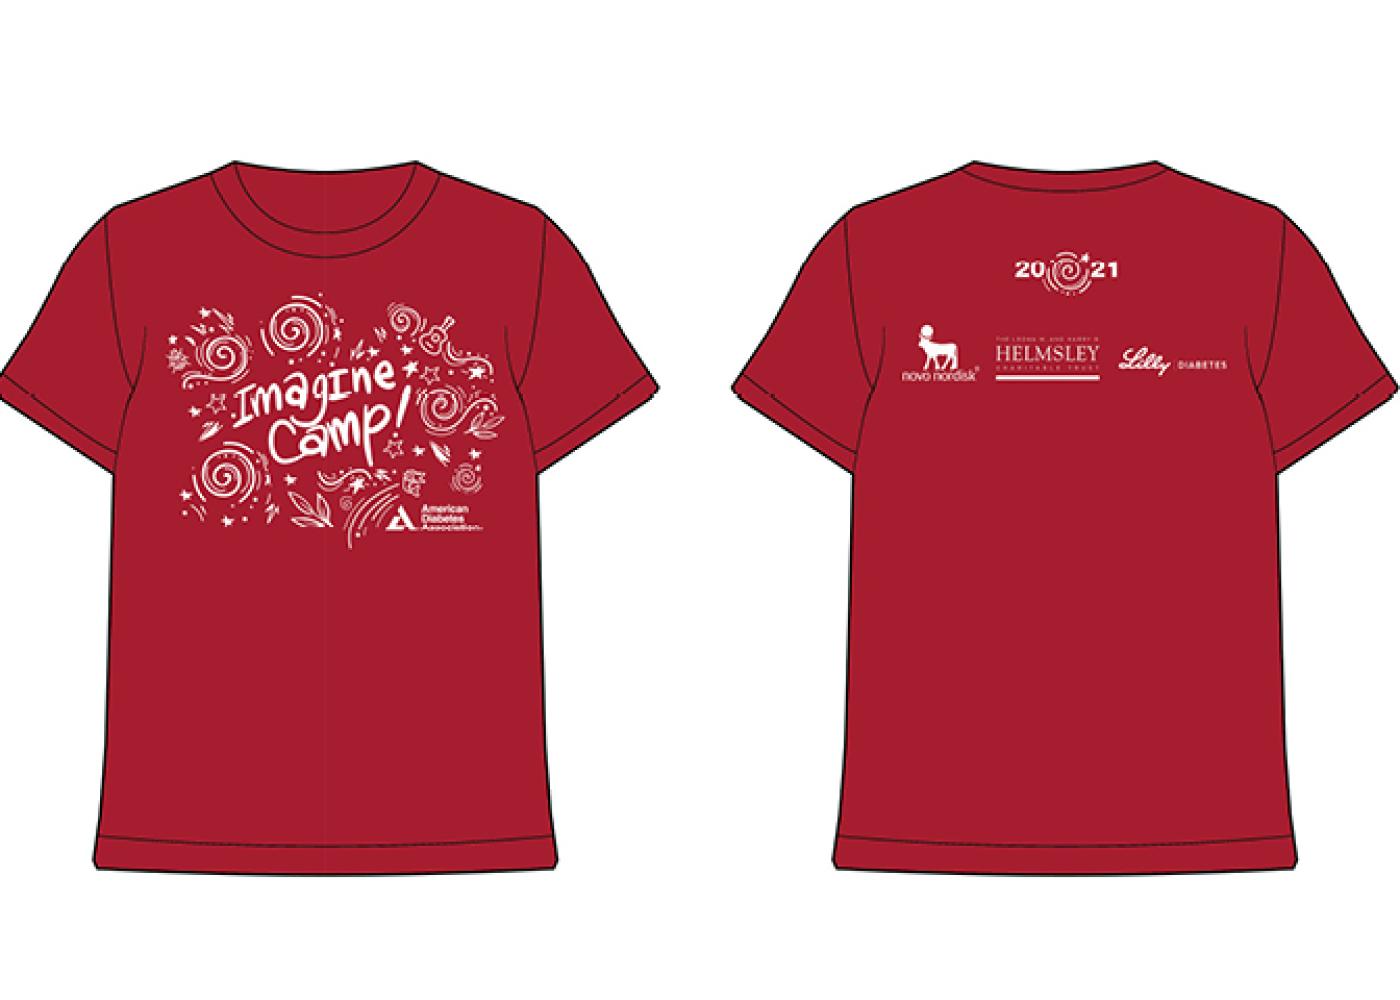 Front and back of Imagine Camp short sleeve shirt